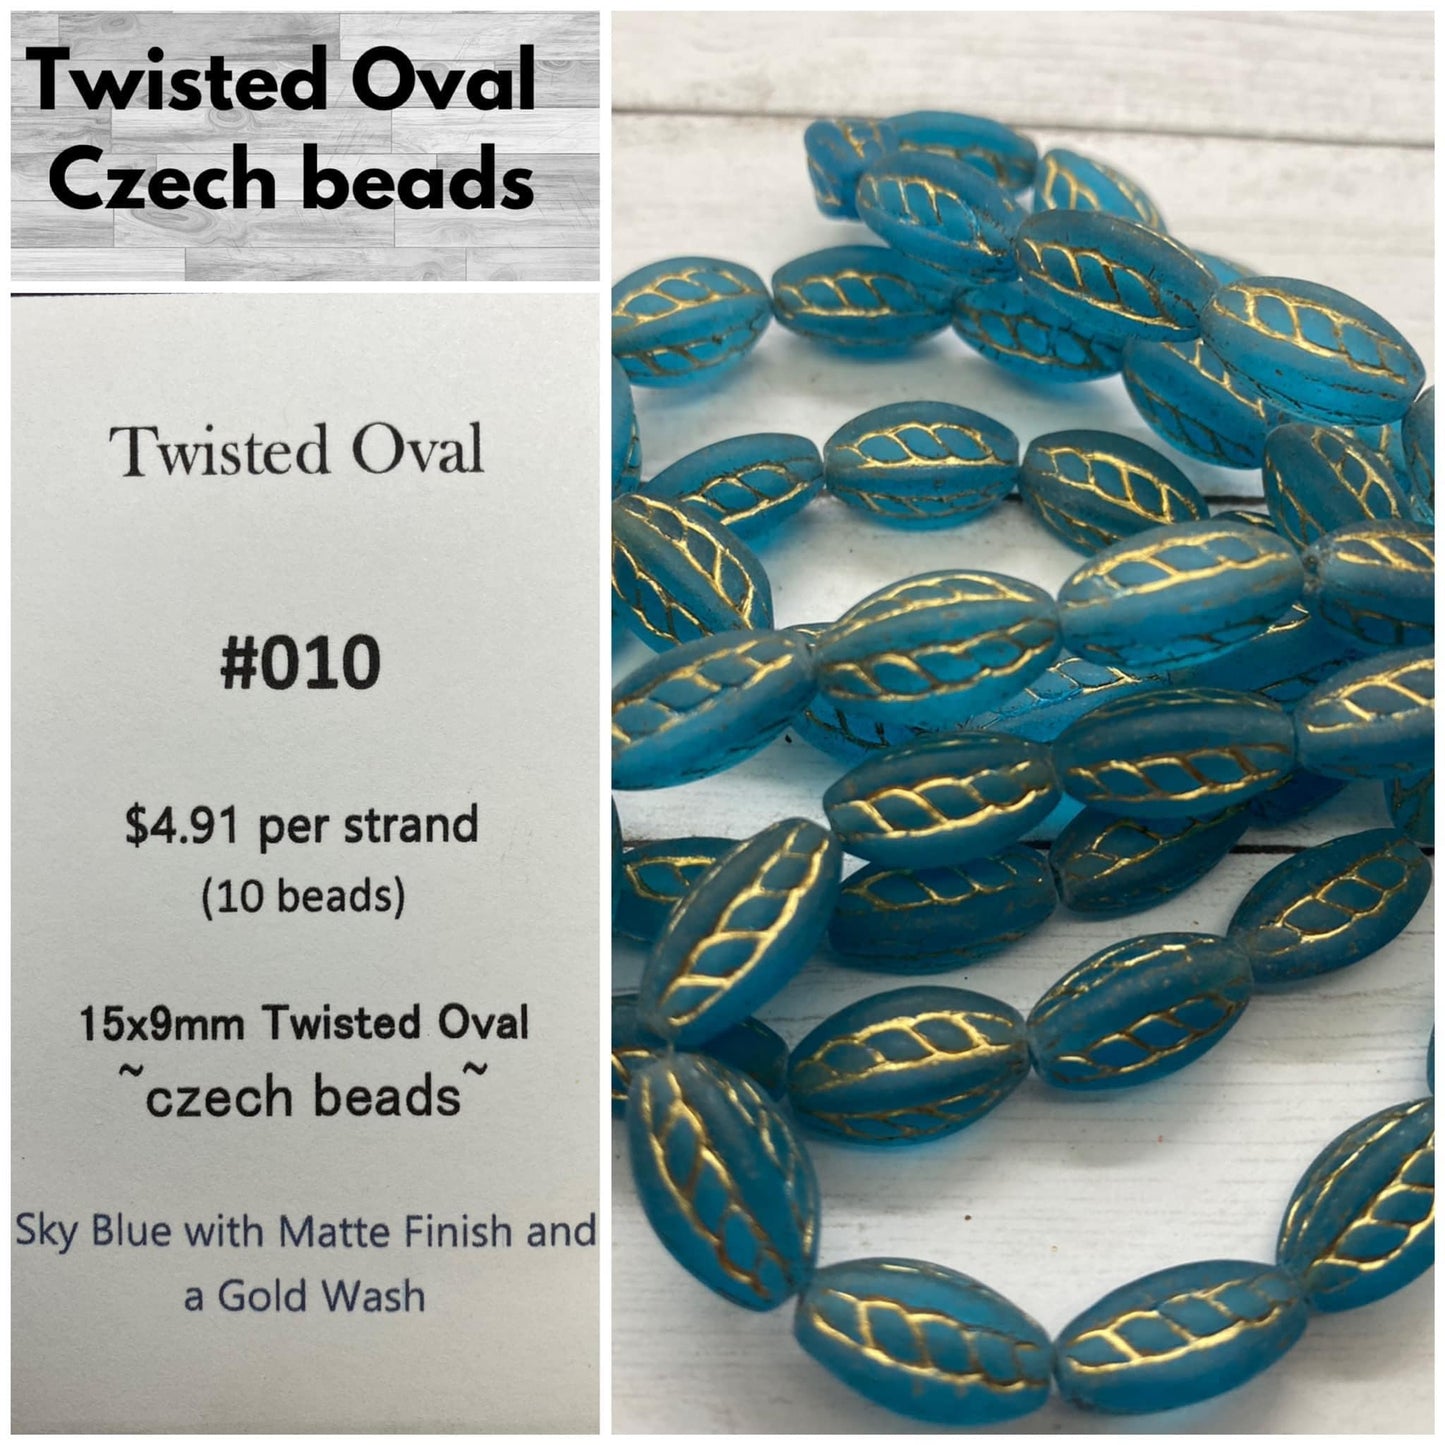 Twisted Oval 15x9mm #010